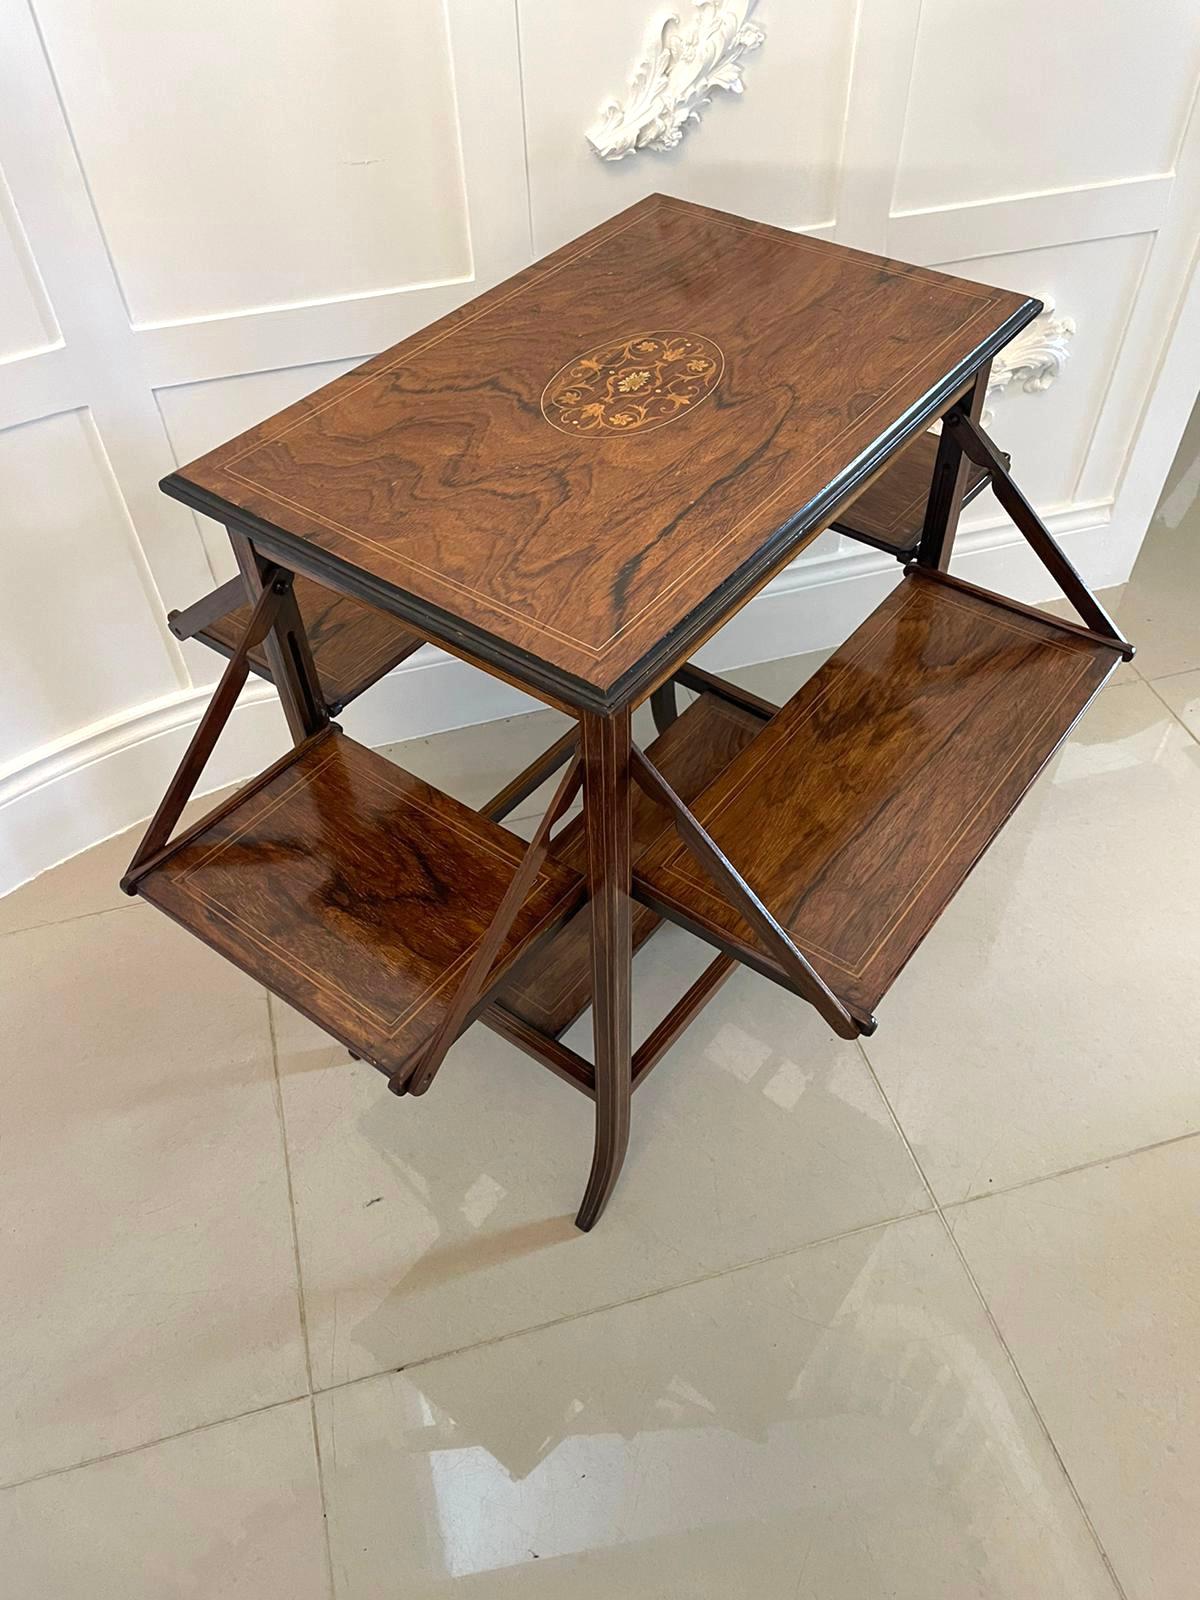 Unusual Antique Edwardian Quality Rosewood Inlaid Centre Table In Good Condition For Sale In Suffolk, GB